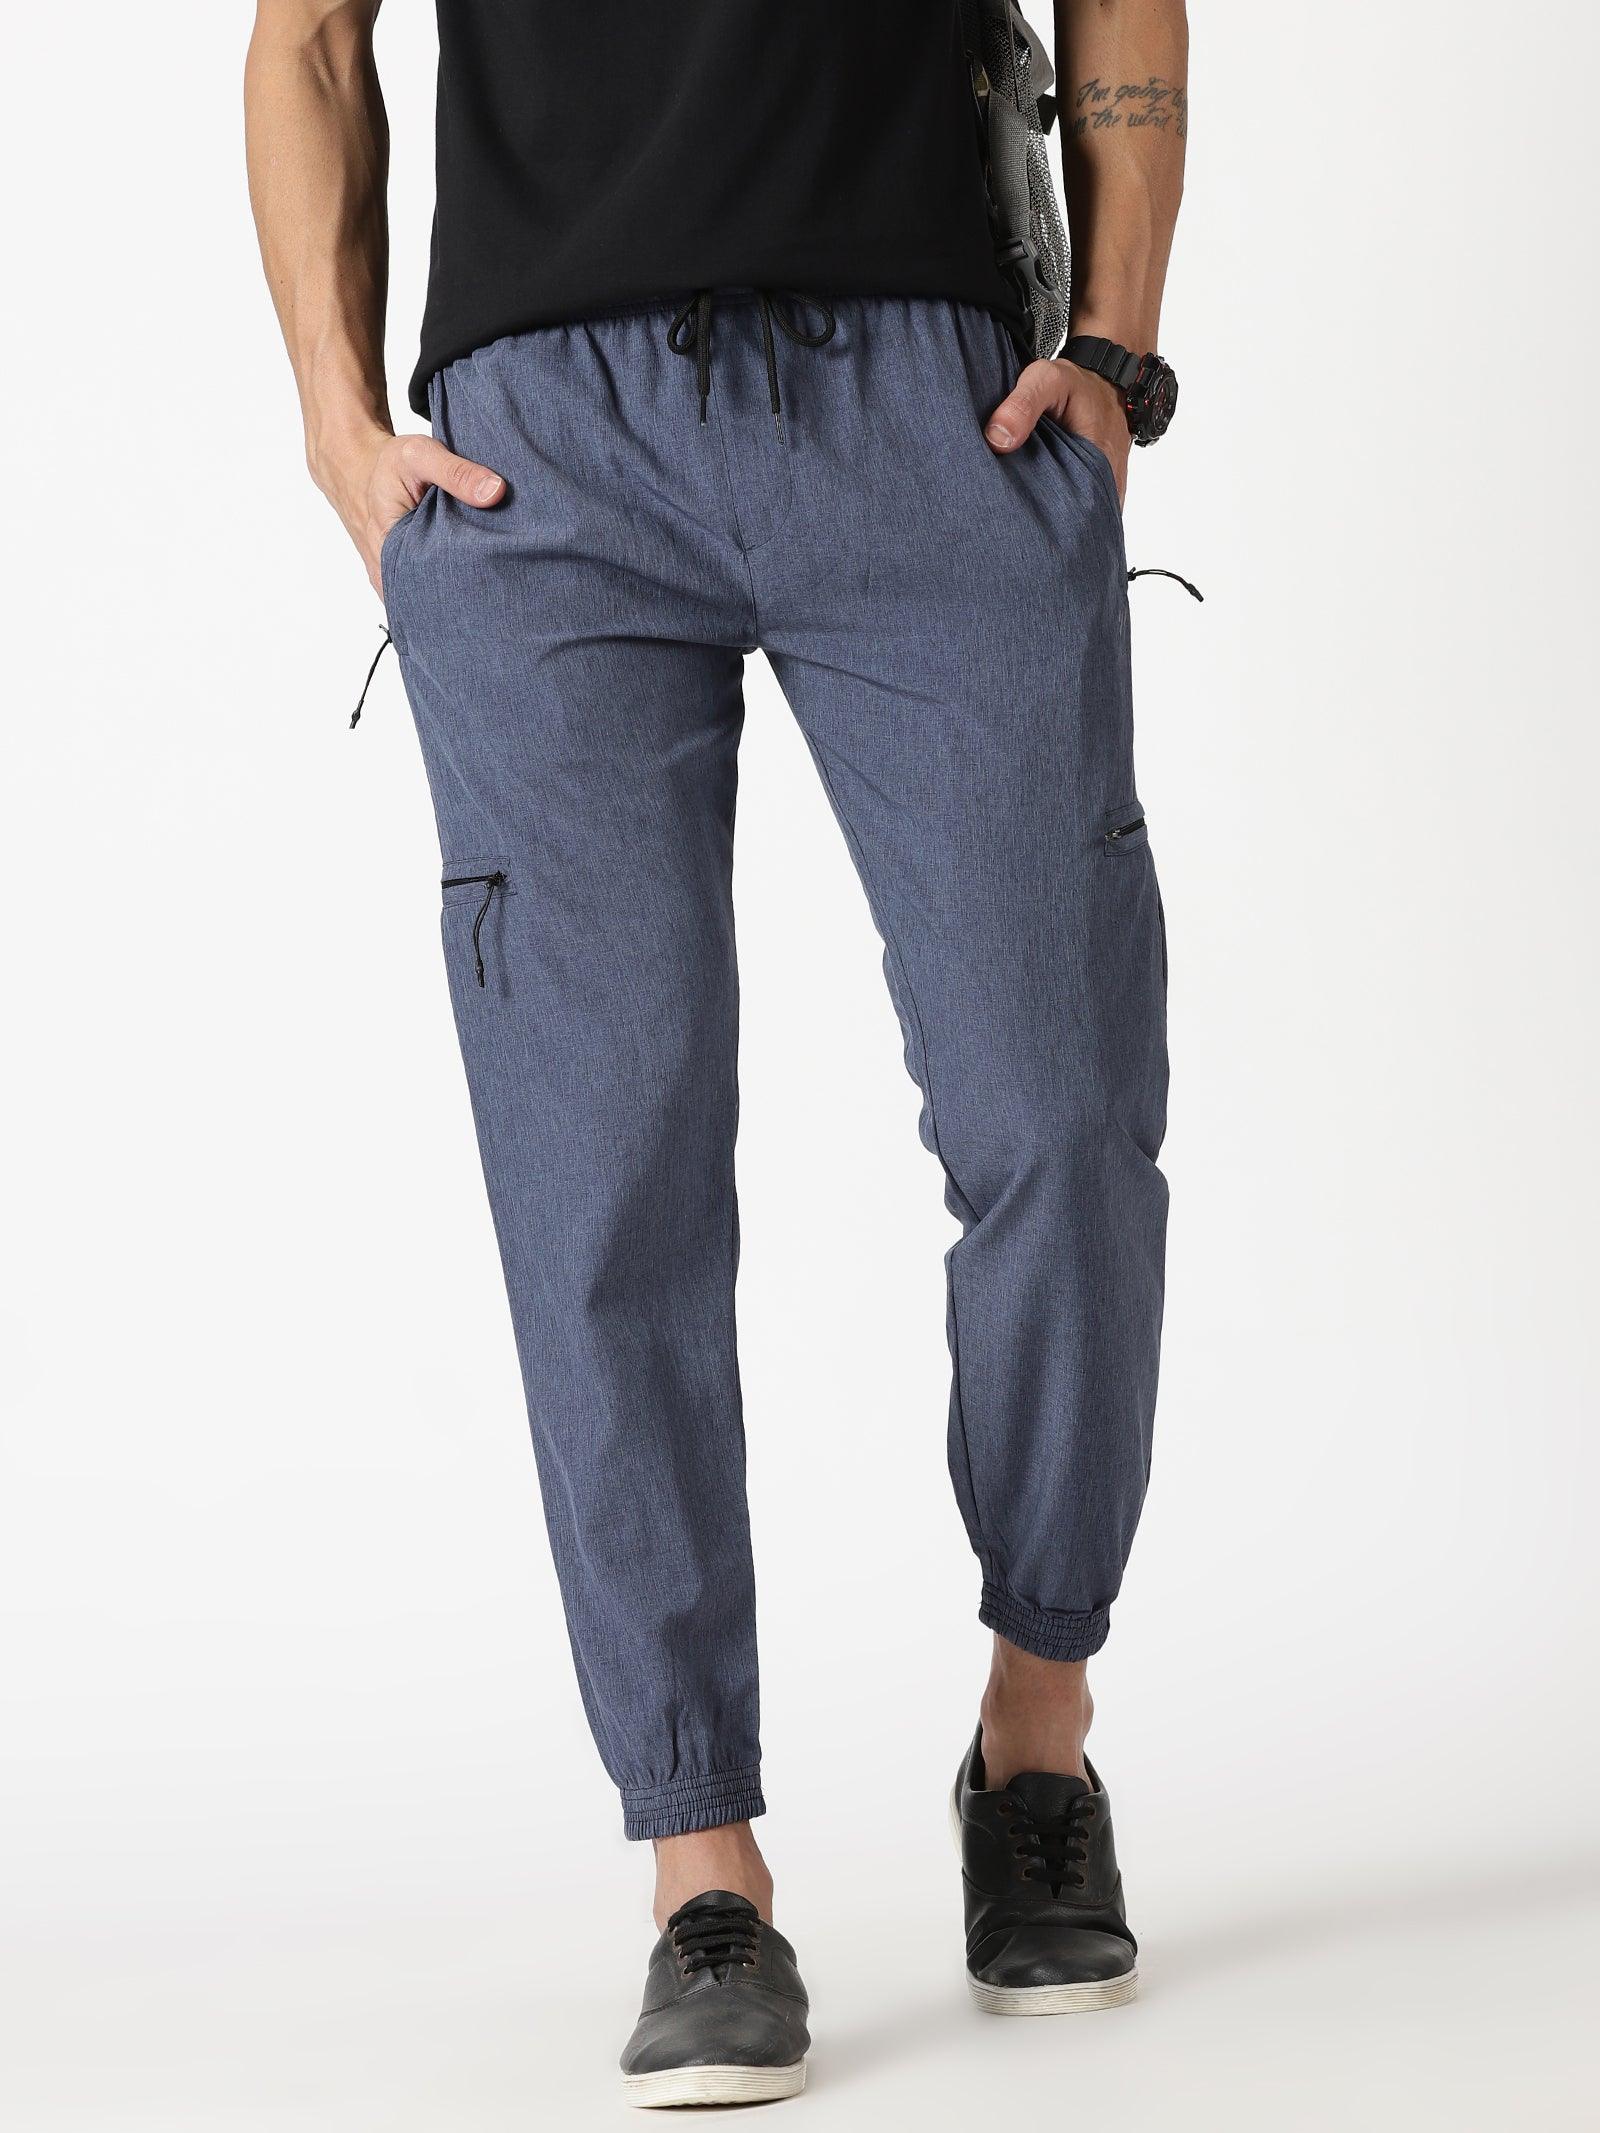 Shoppers Love These Women's Joggers for Workouts and Travel